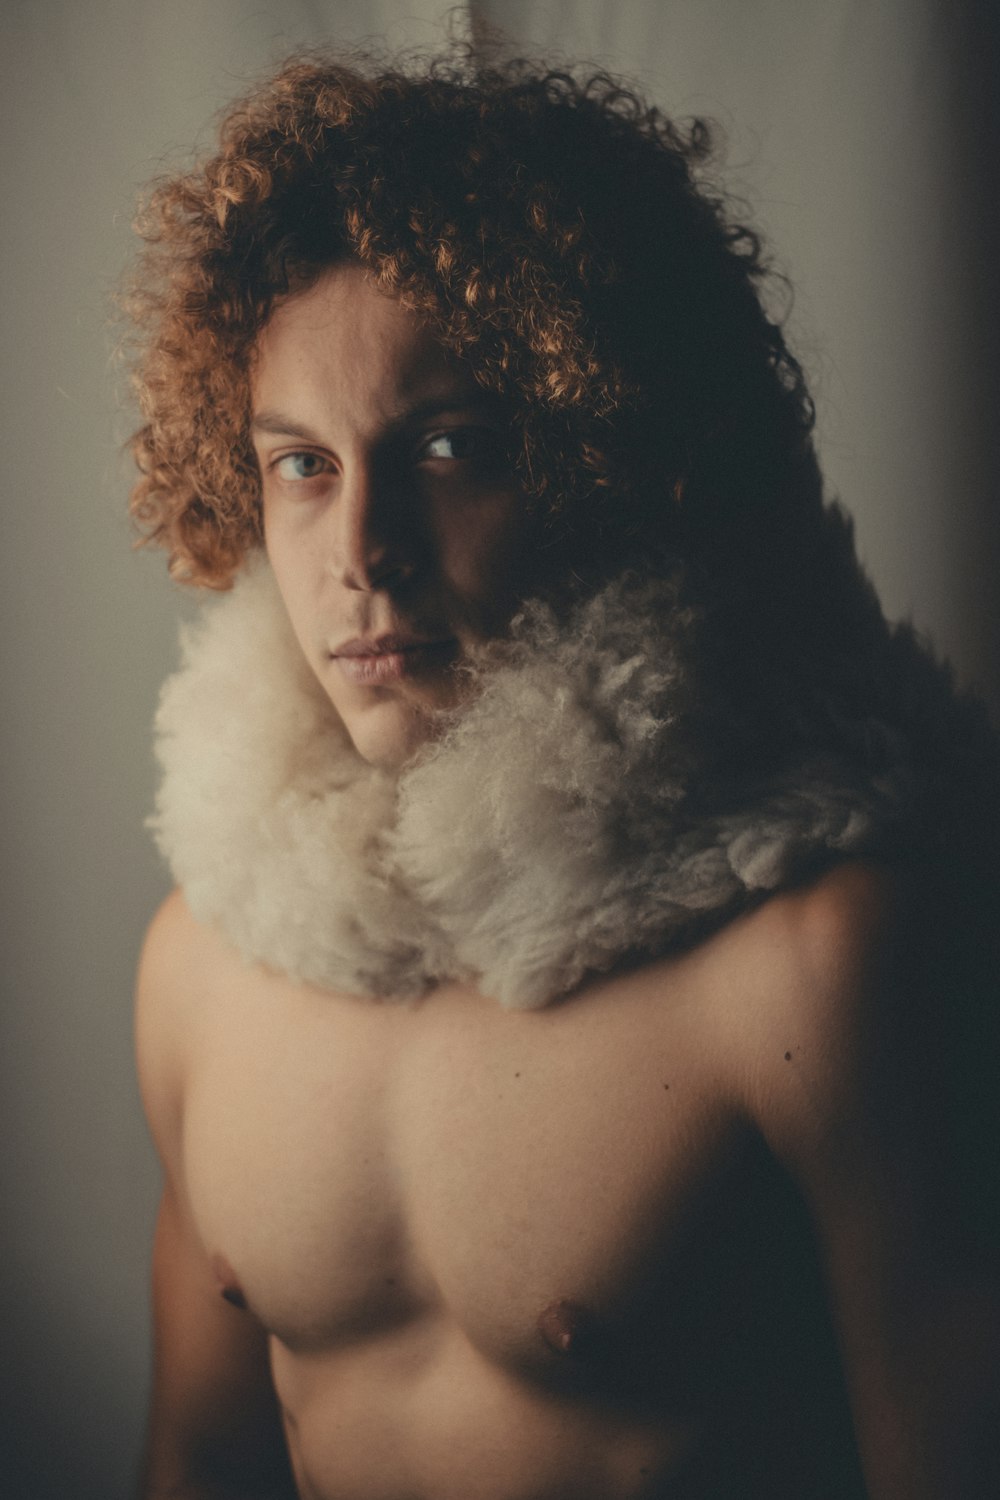 a shirtless man with curly hair and a scarf around his neck